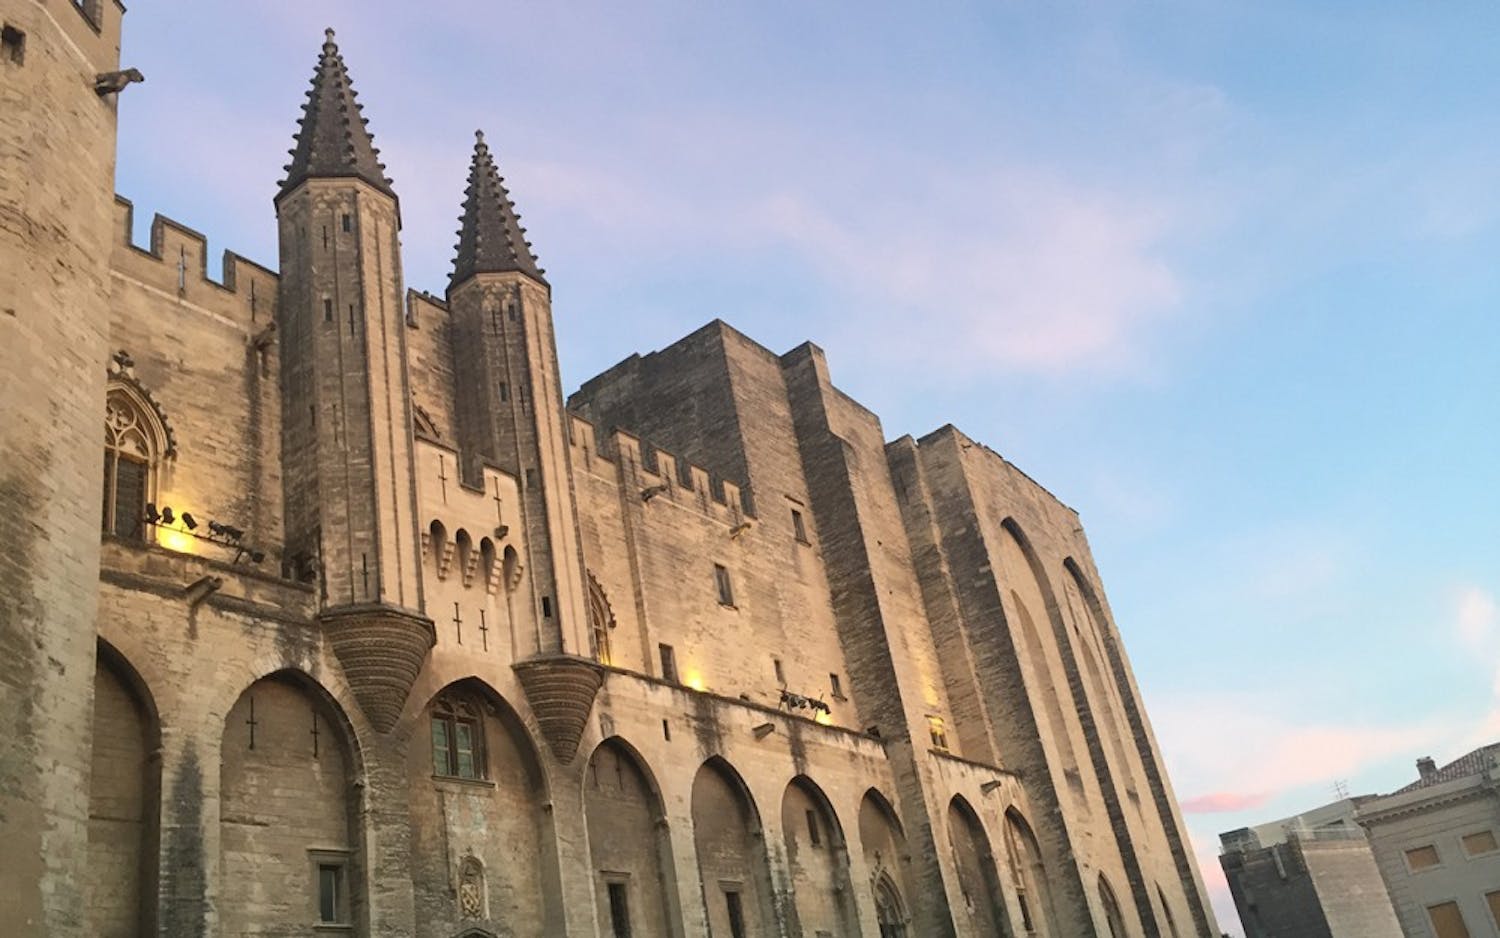 The sun sets at the Palais des Papes in the ancient city center of Avignon. Avignon is known historically as the medieval capital of the Christian church, but still stands almost 700 years later.